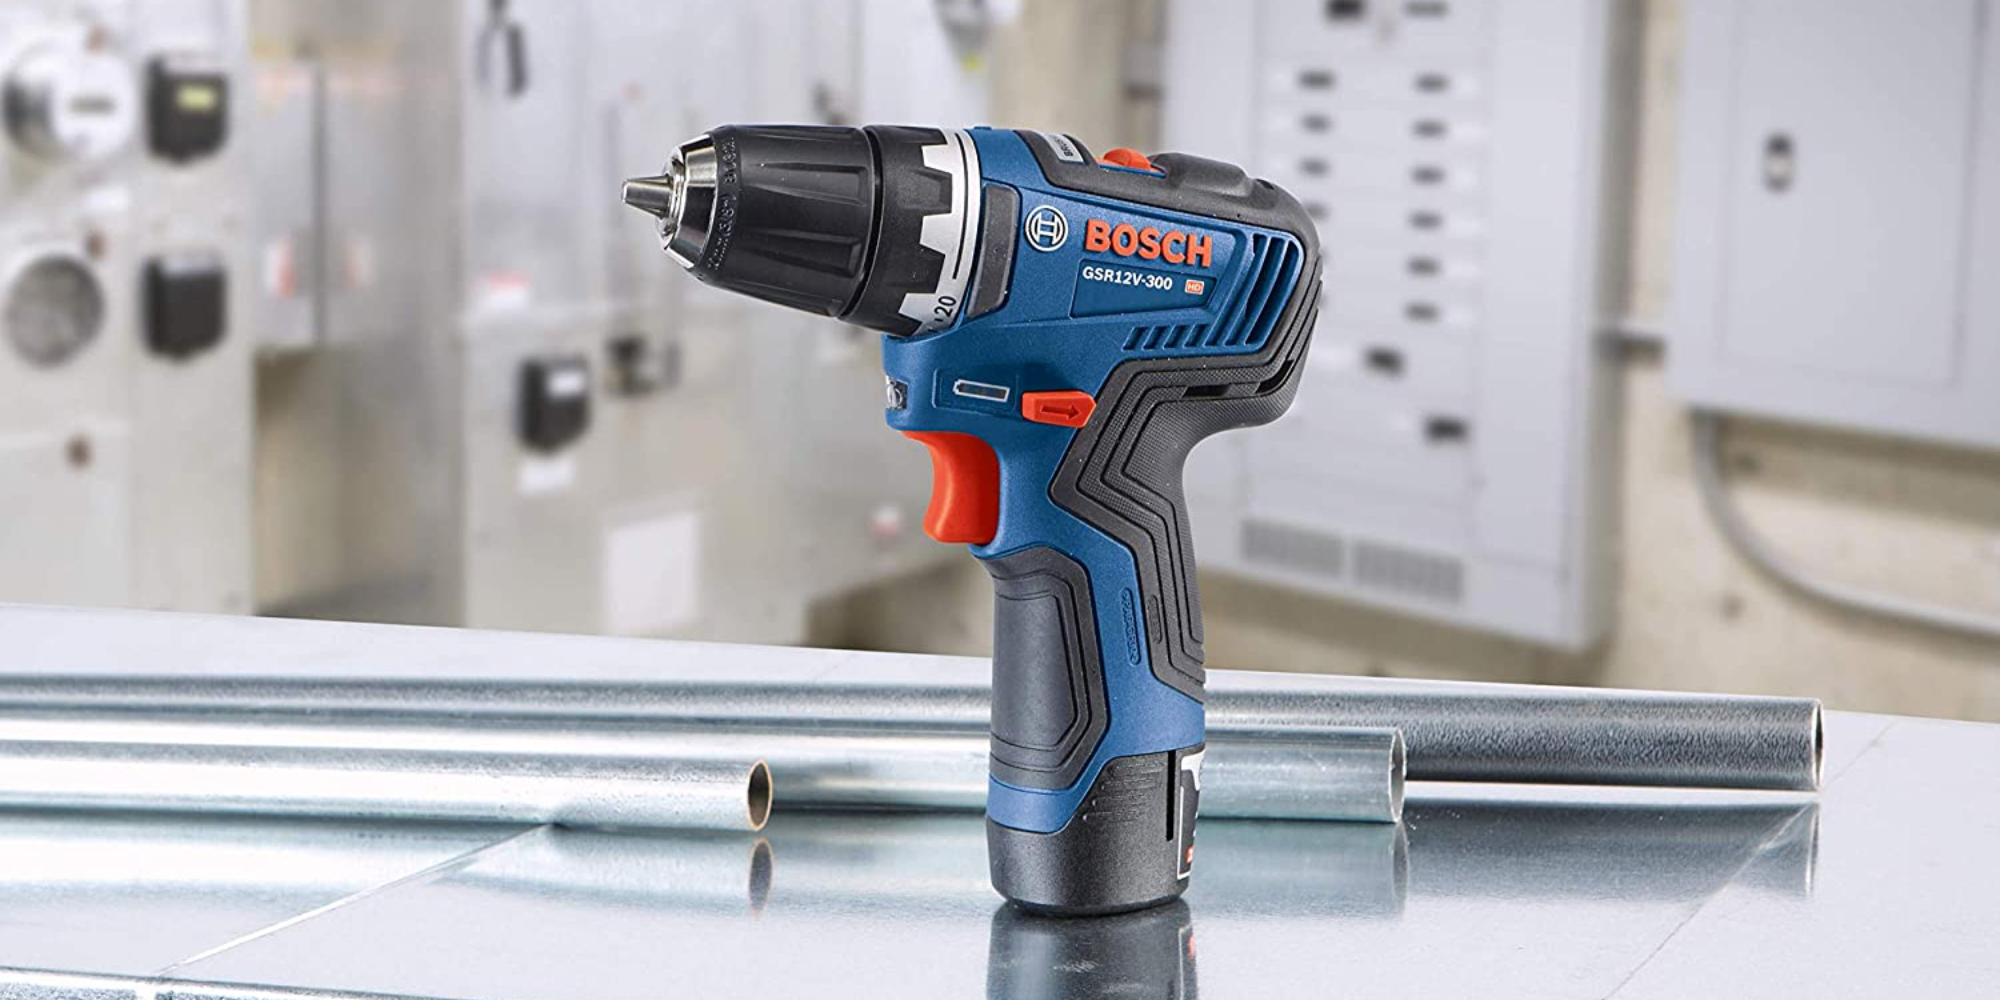 Bosch's Brushless Drill/Driver weighs 1.6-pounds, more DEWALT and